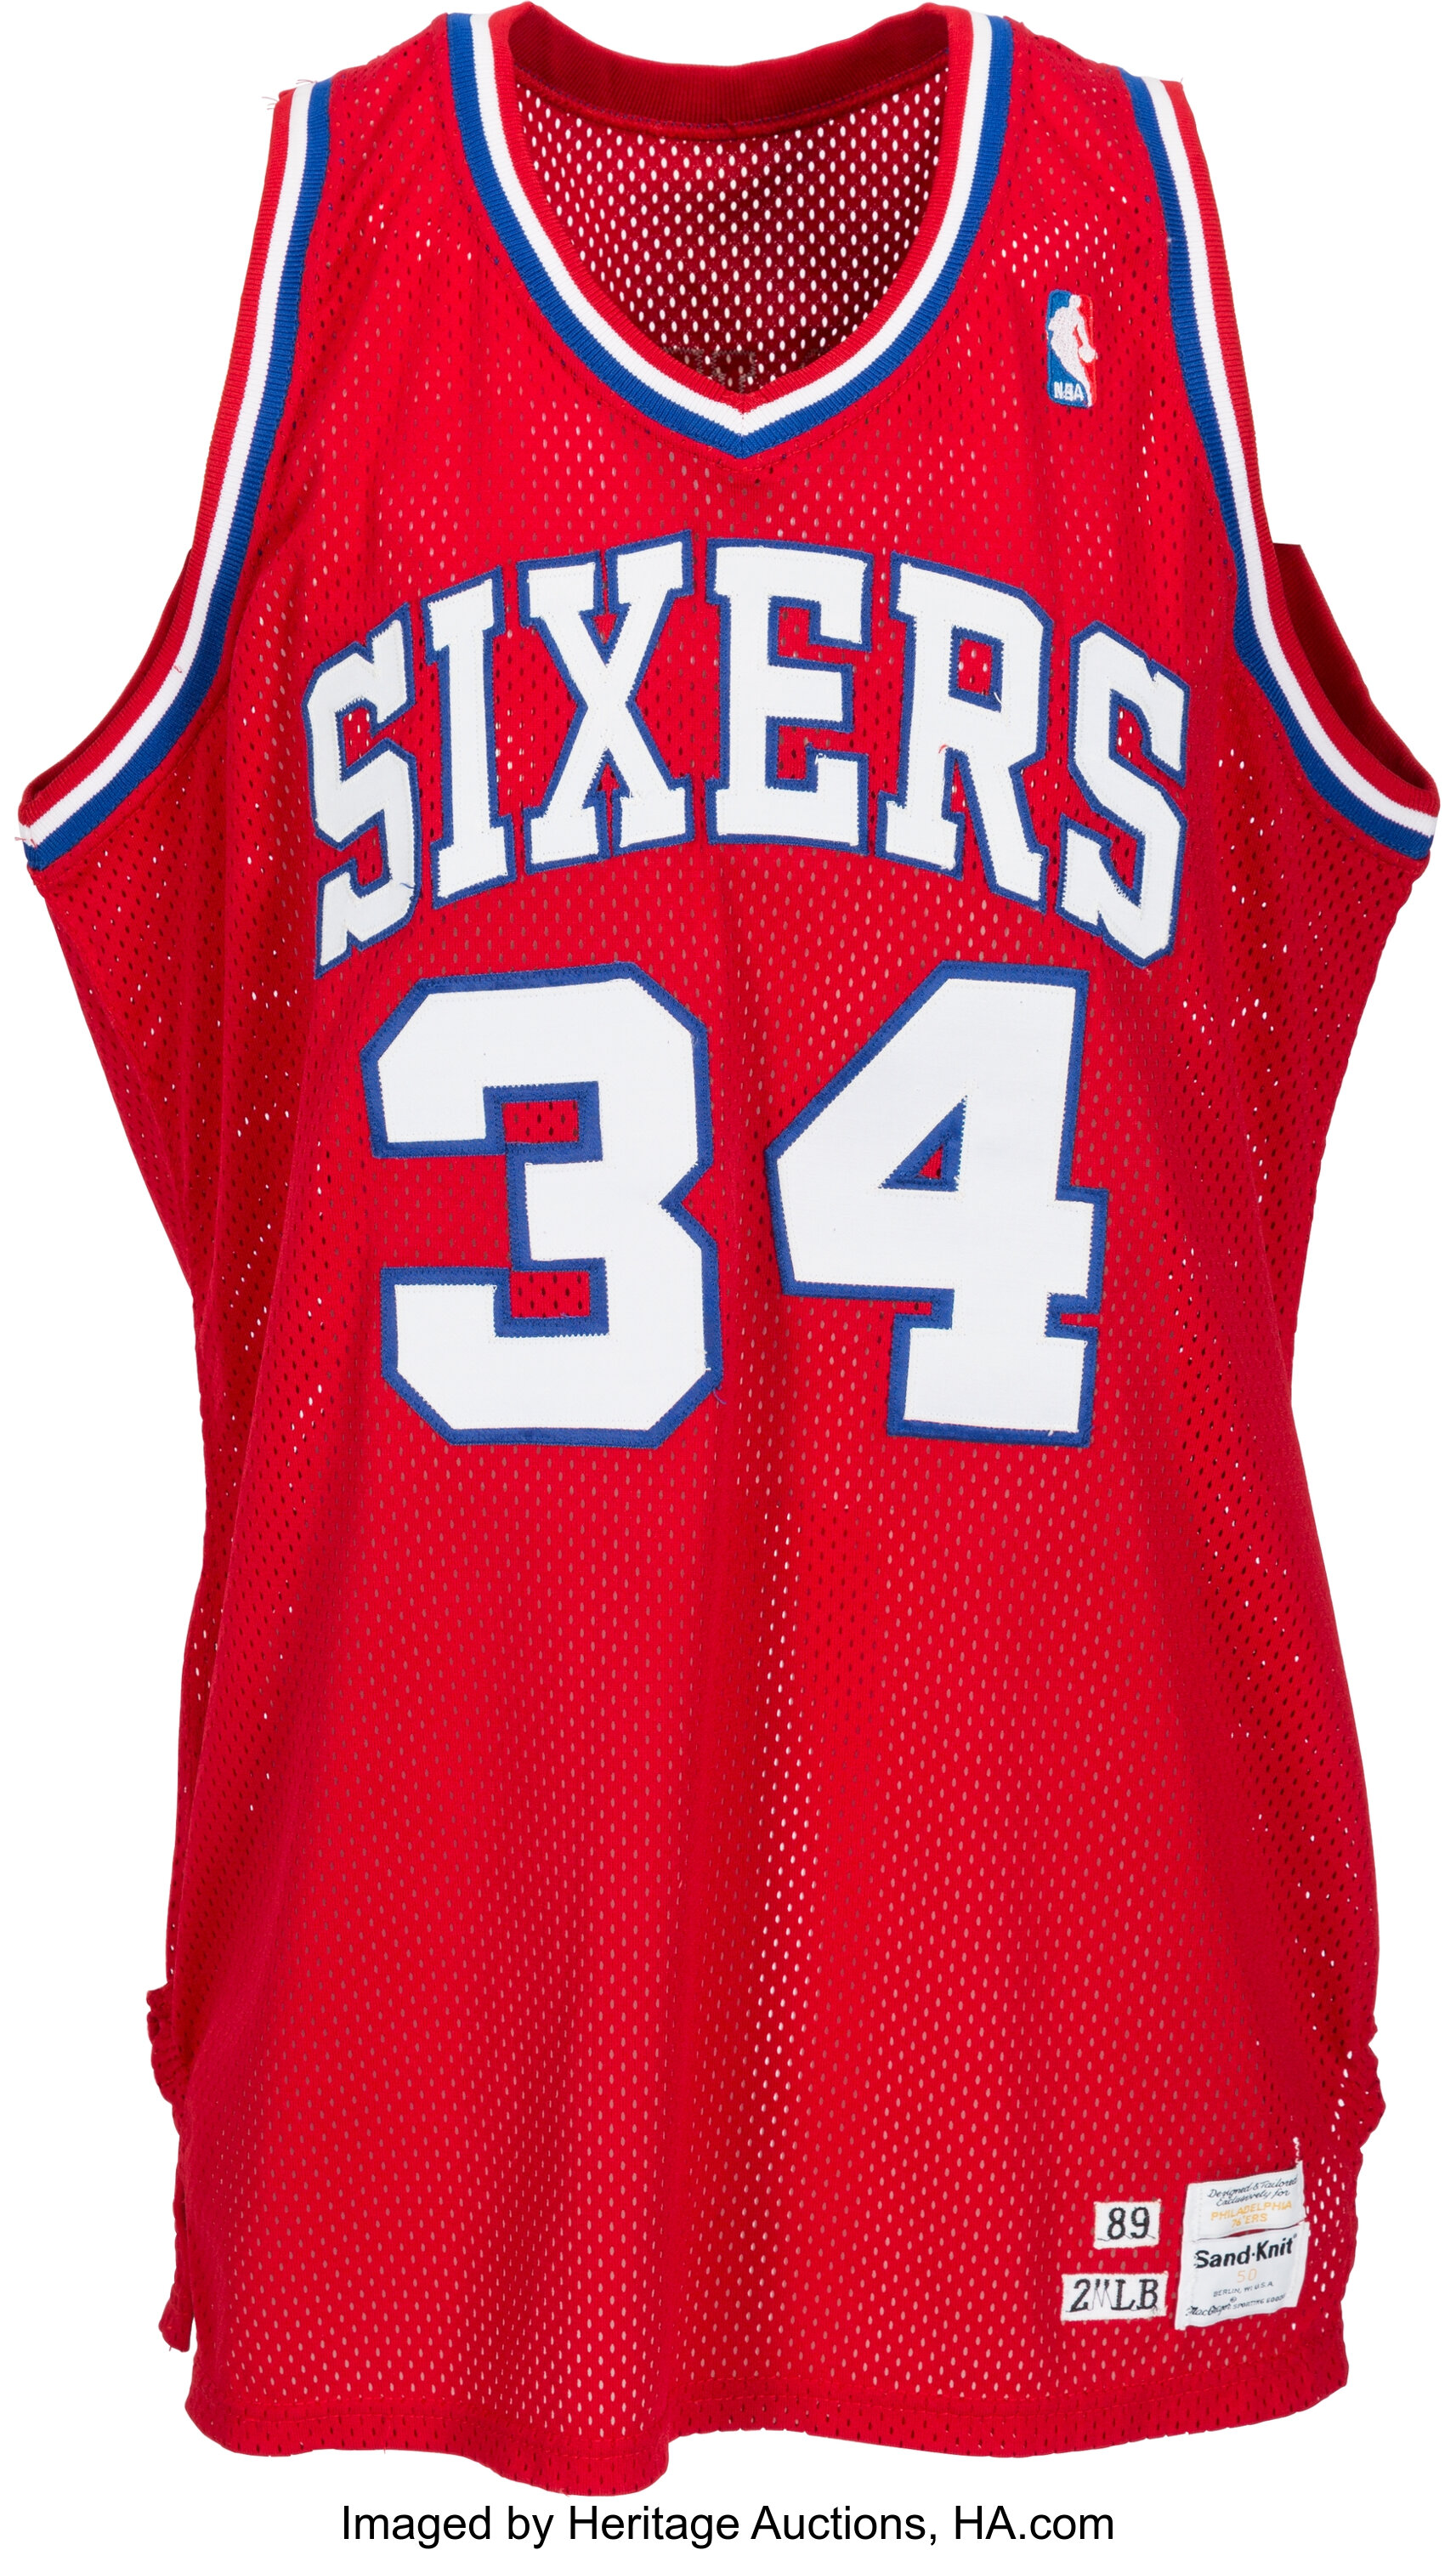 Charles Barkley Jersey, Clothing and Apparel